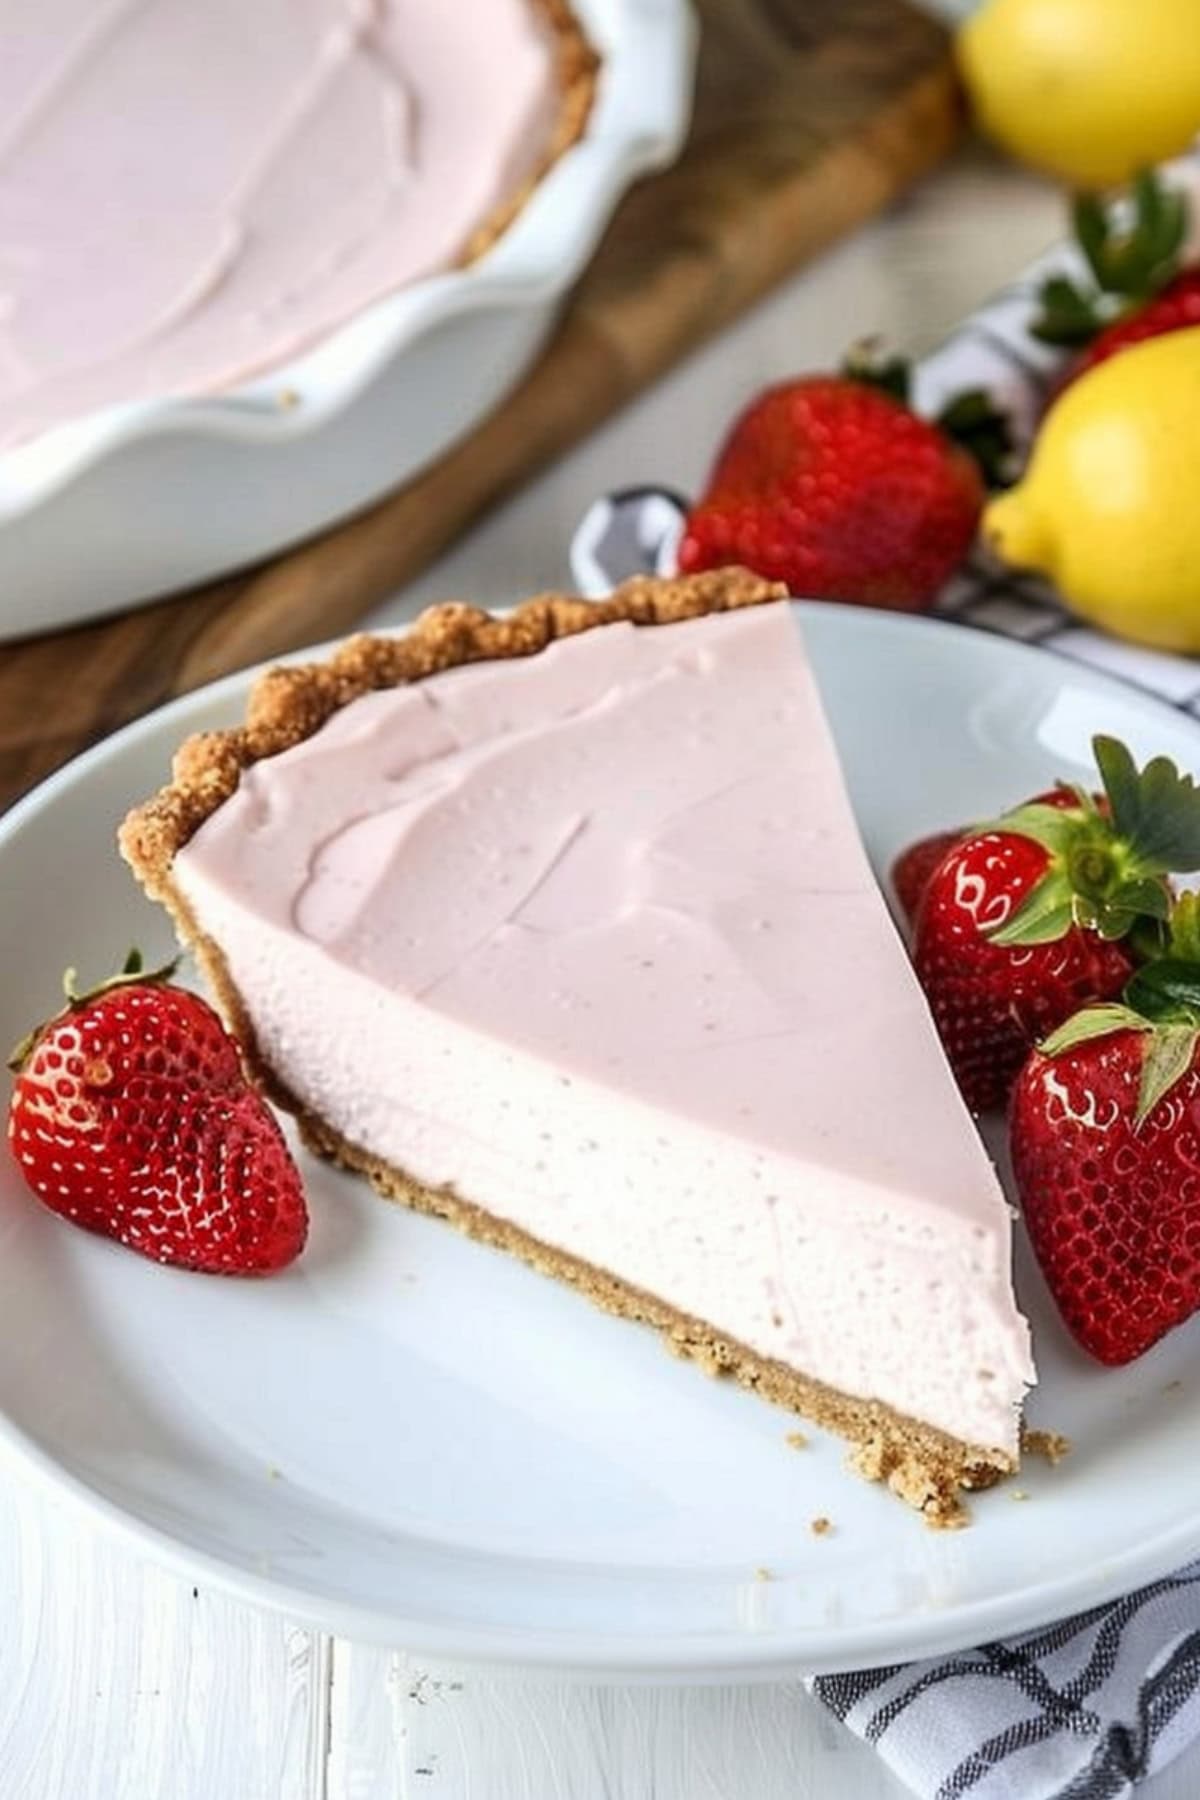 Slice of strawberry lemonade pie served on a white plate with fresh strawberries.